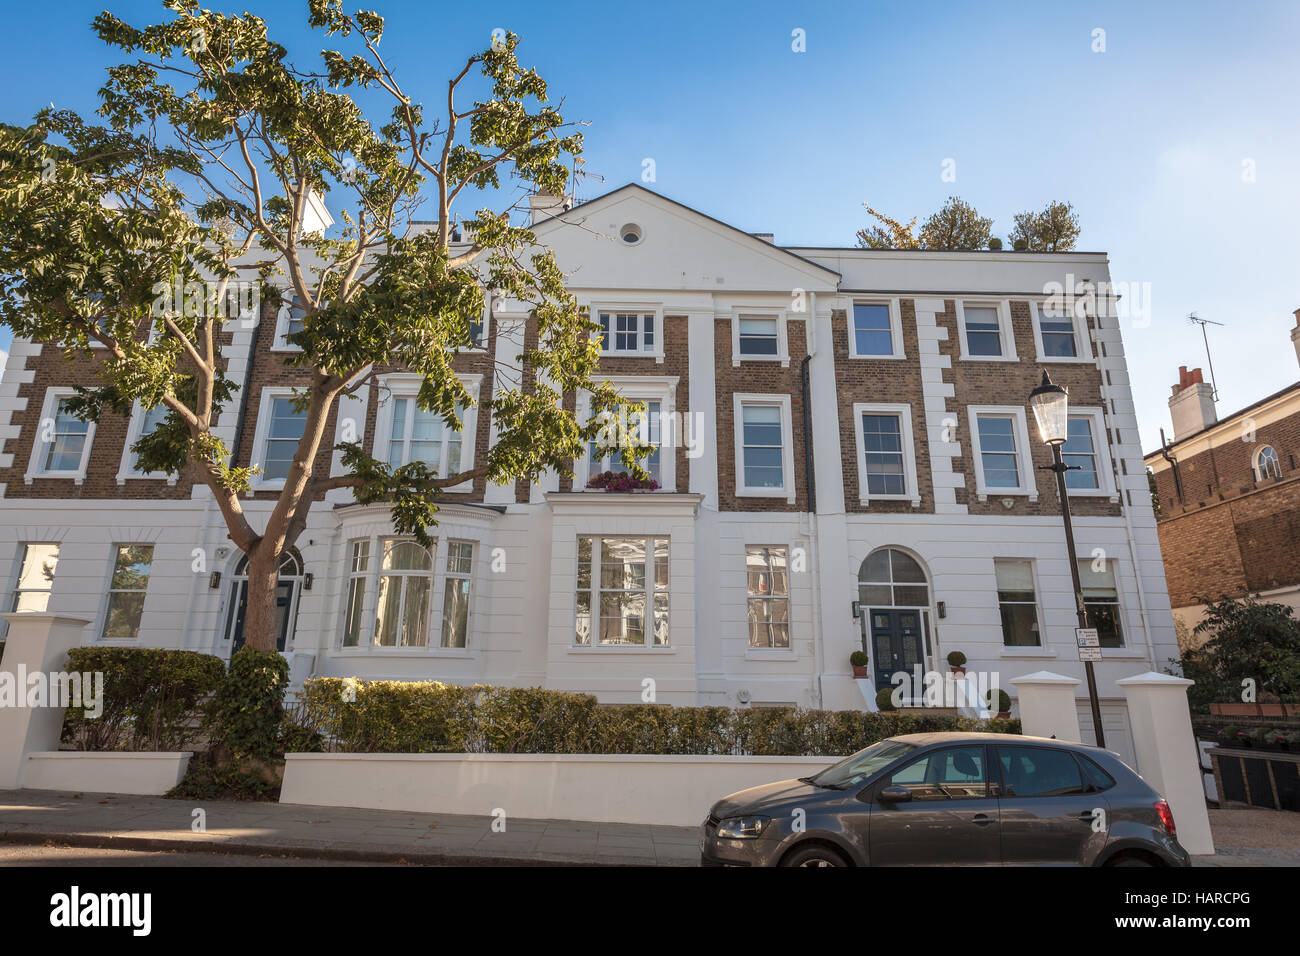 London properties real estate house in Notting Hill Stock Photo